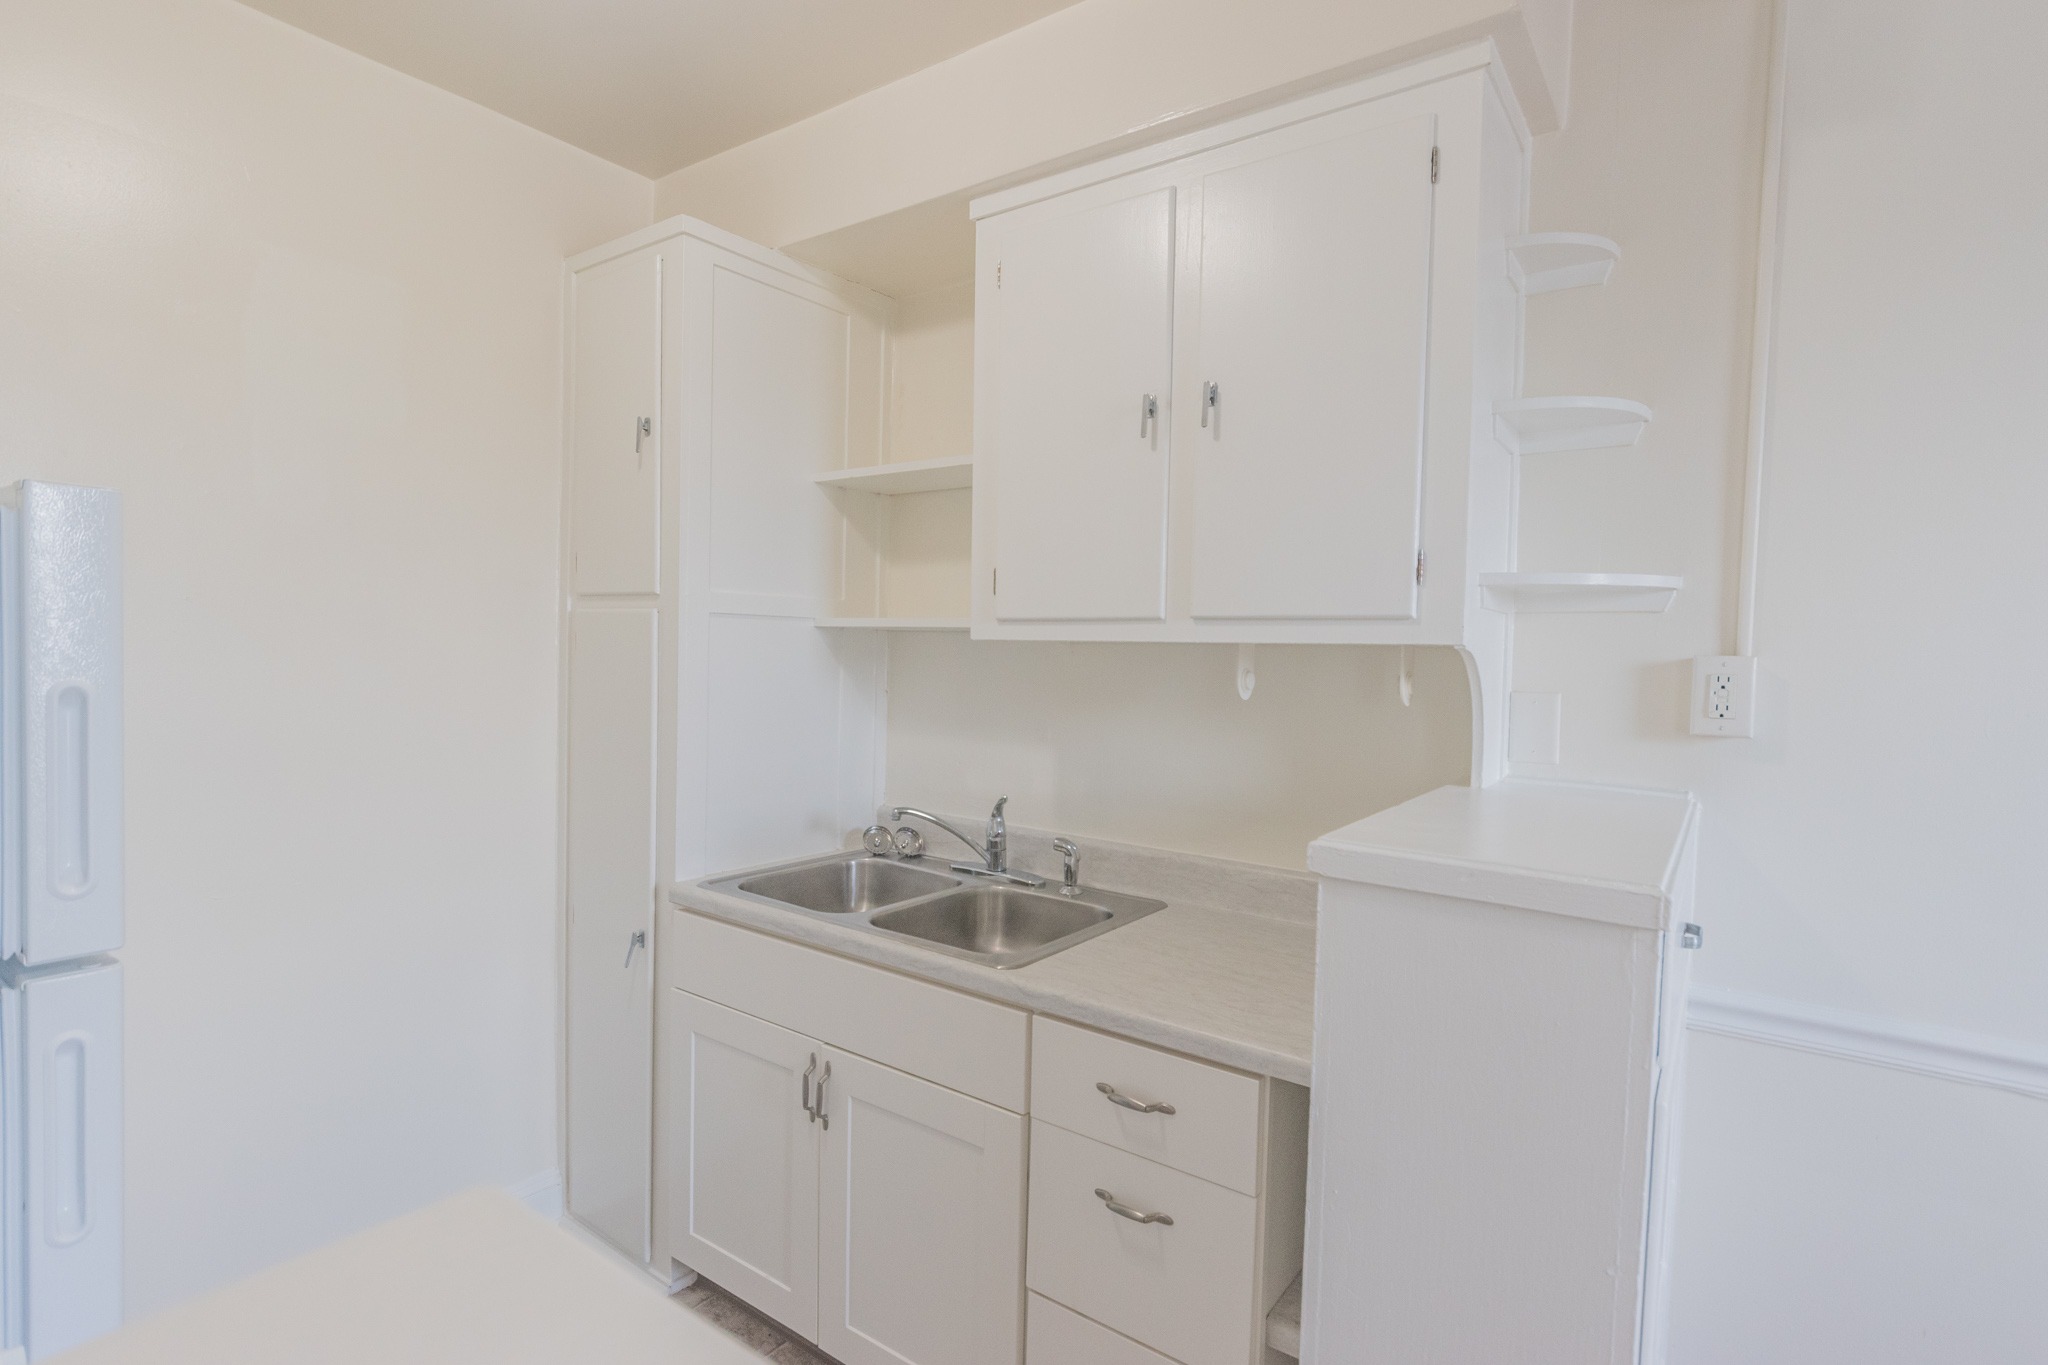 The kitchen area of an apartment, fitted with tiled flooring, spacious cabinets, and a dual sink